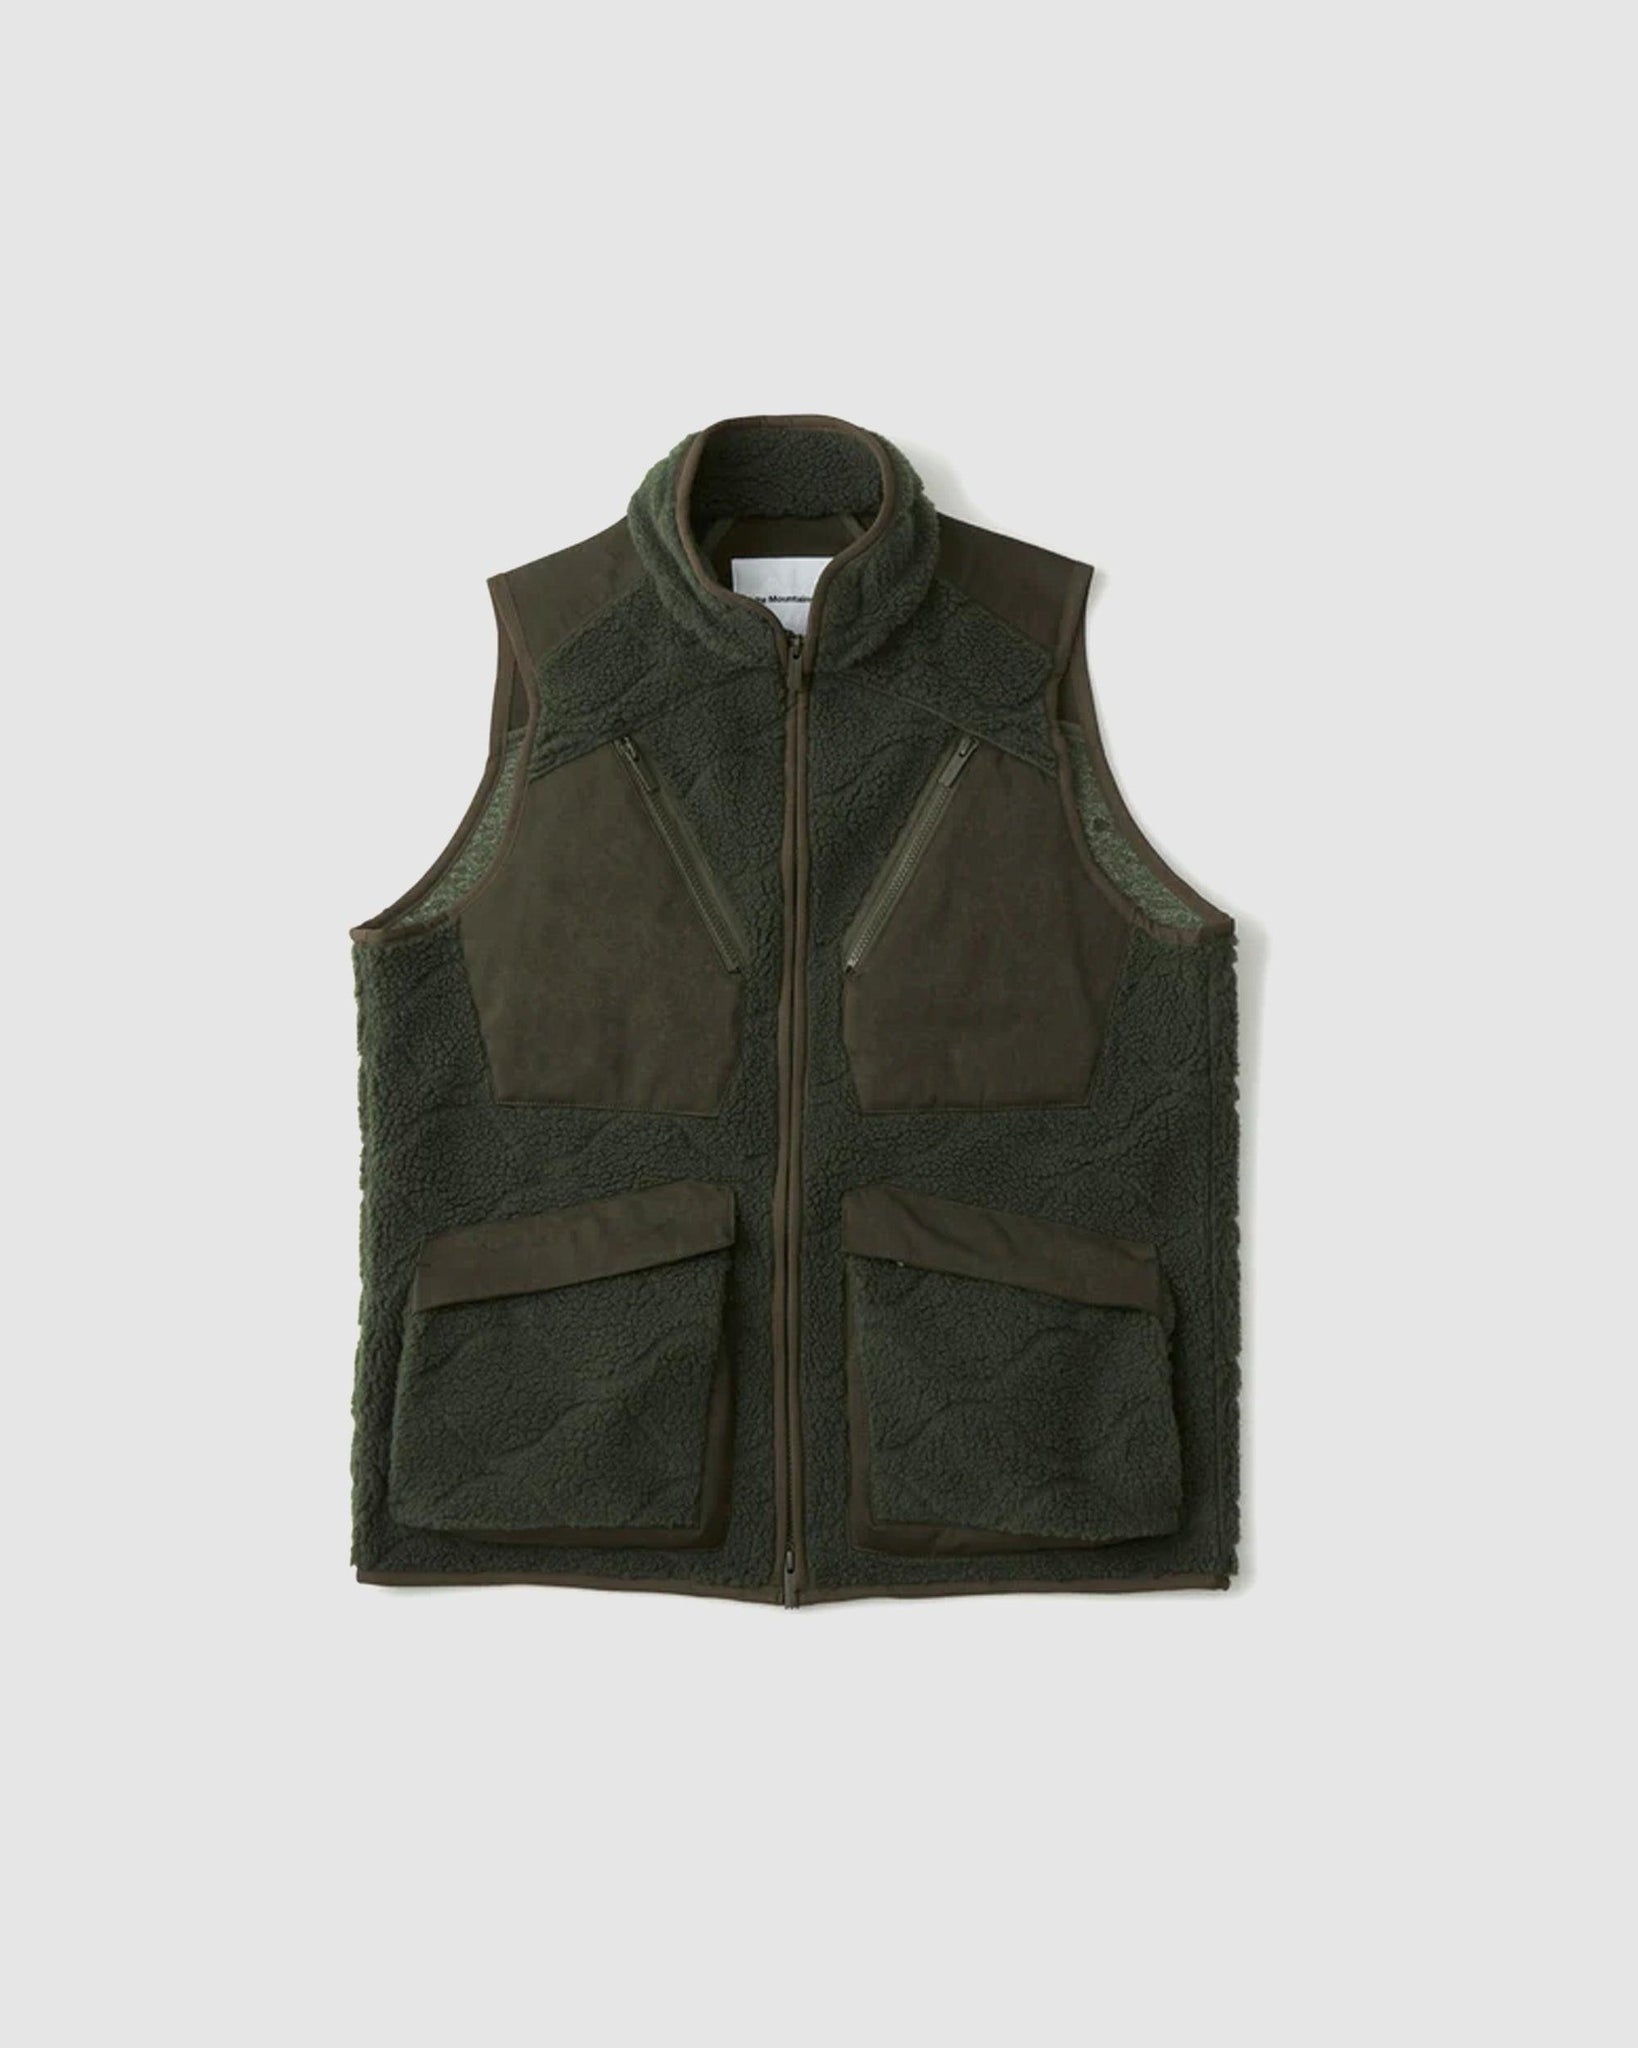 Boa Fleece Vest - {{ collection.title }} - Chinatown Country Club 